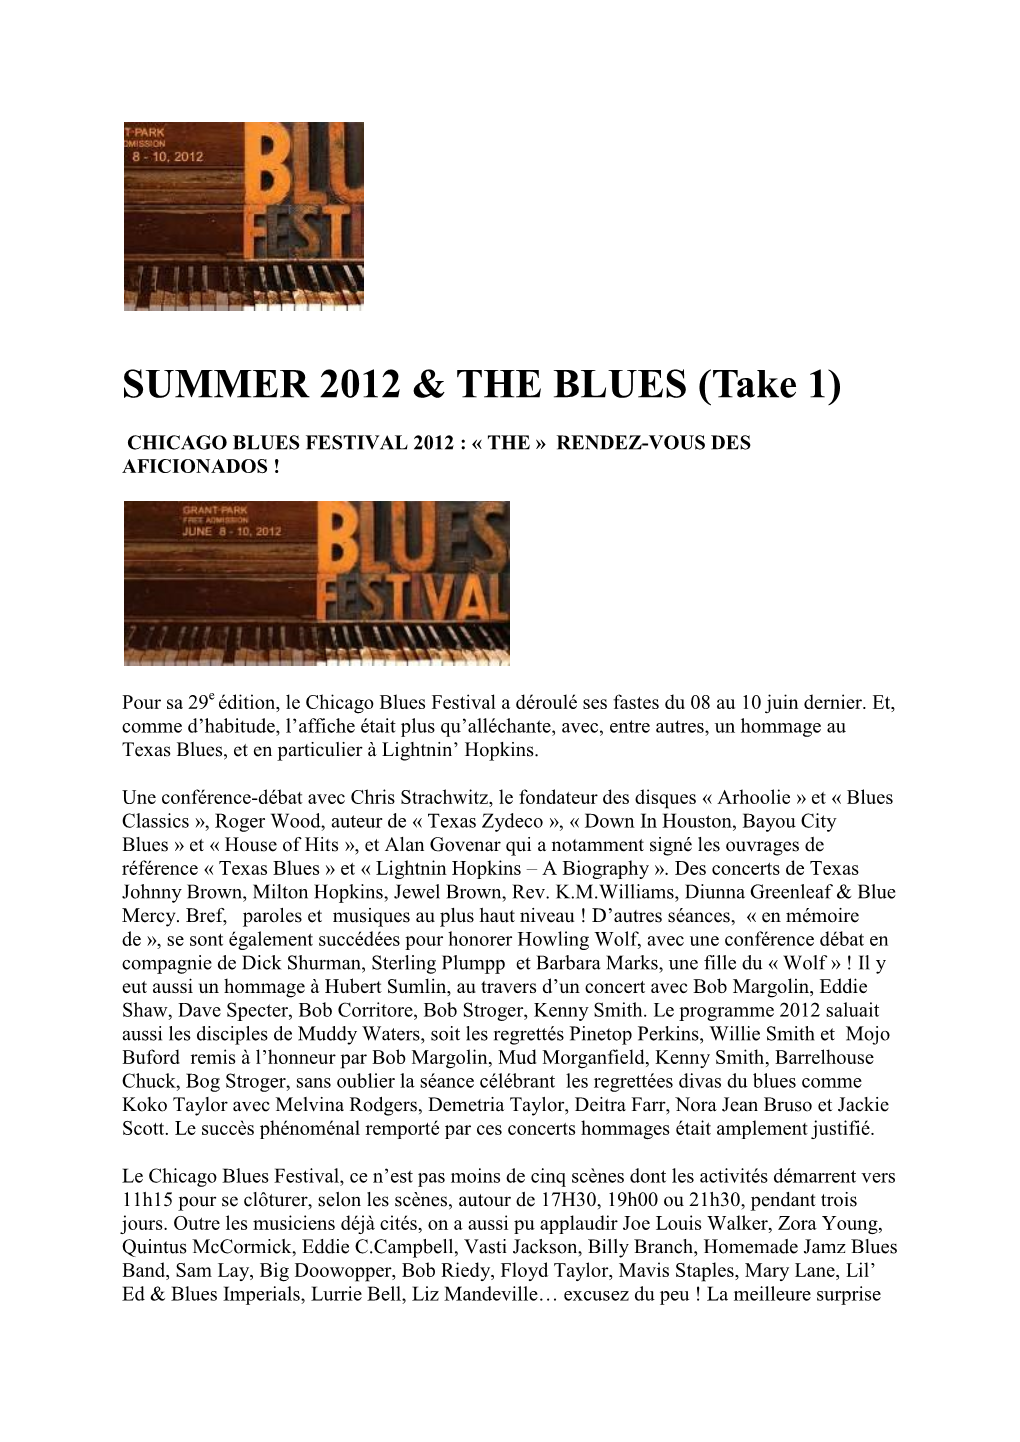 Summer 2012 & the Blues